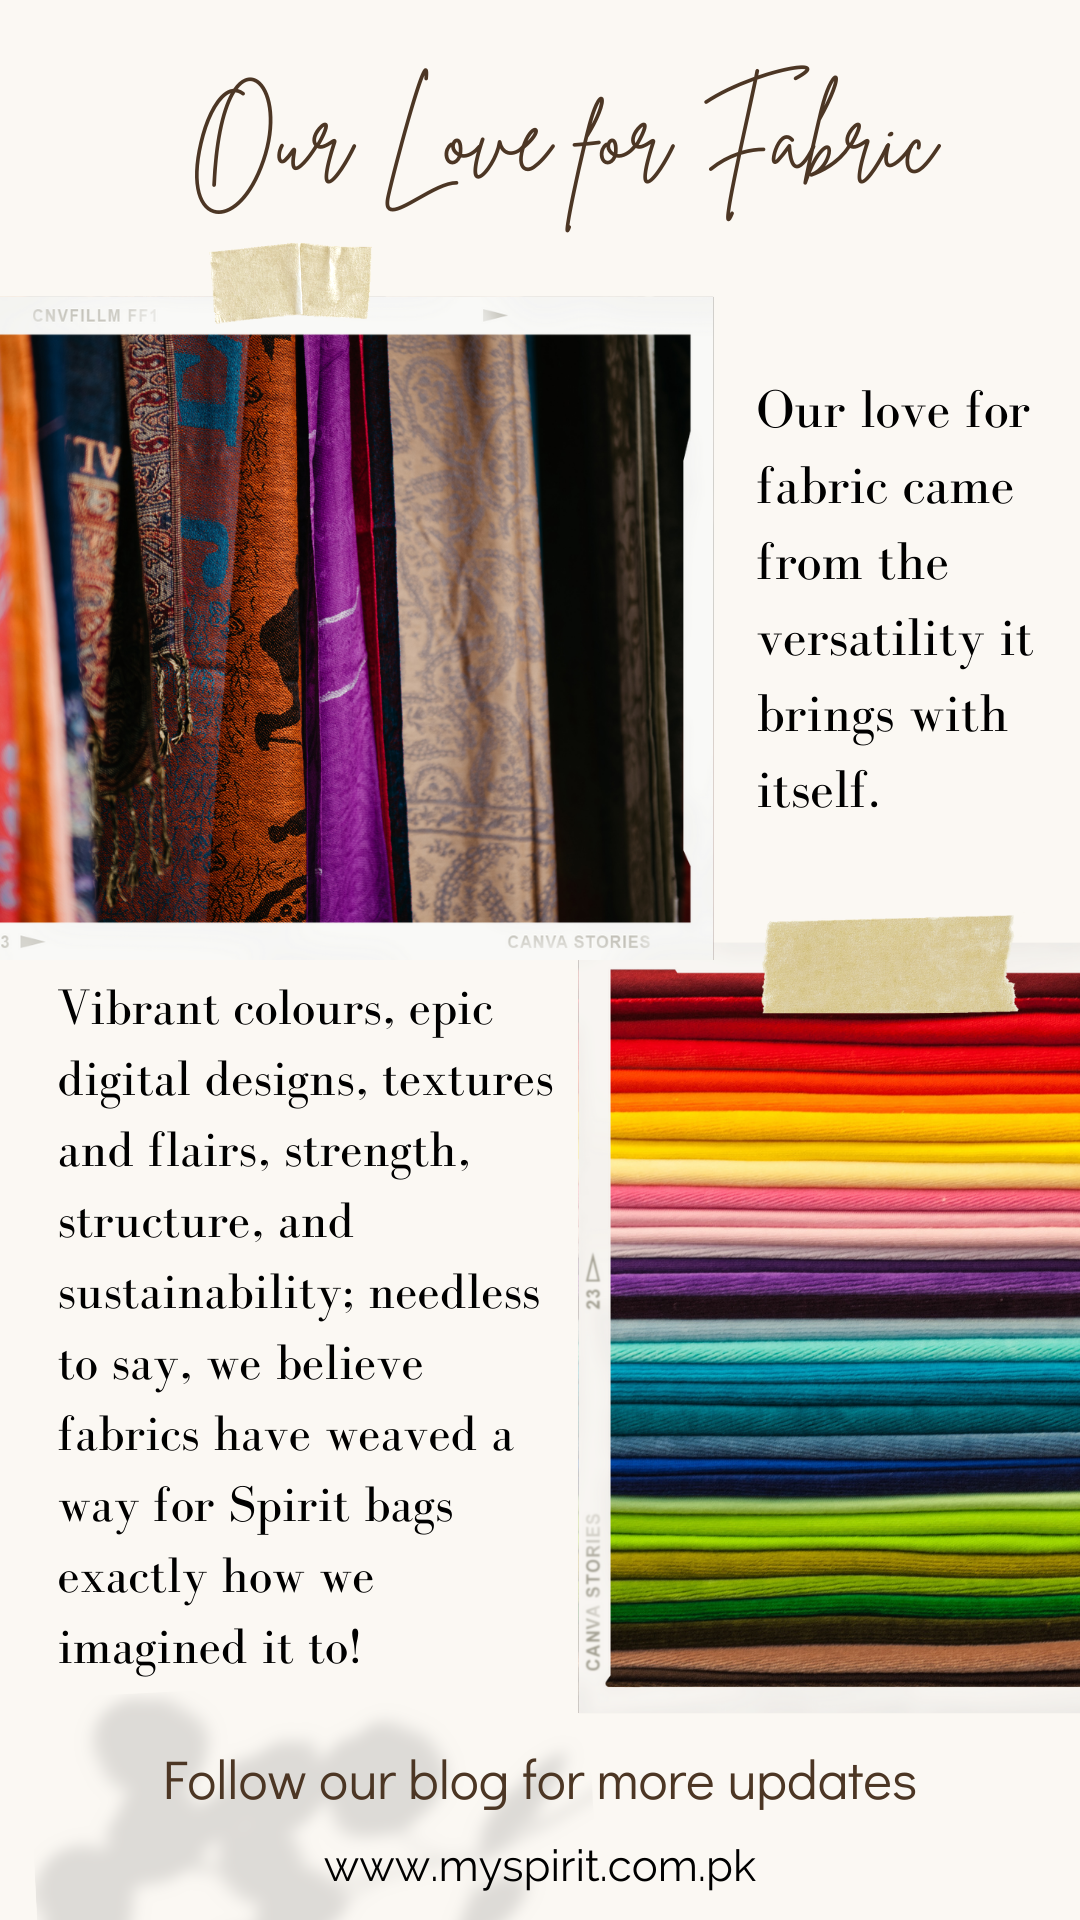 Our love for fabric